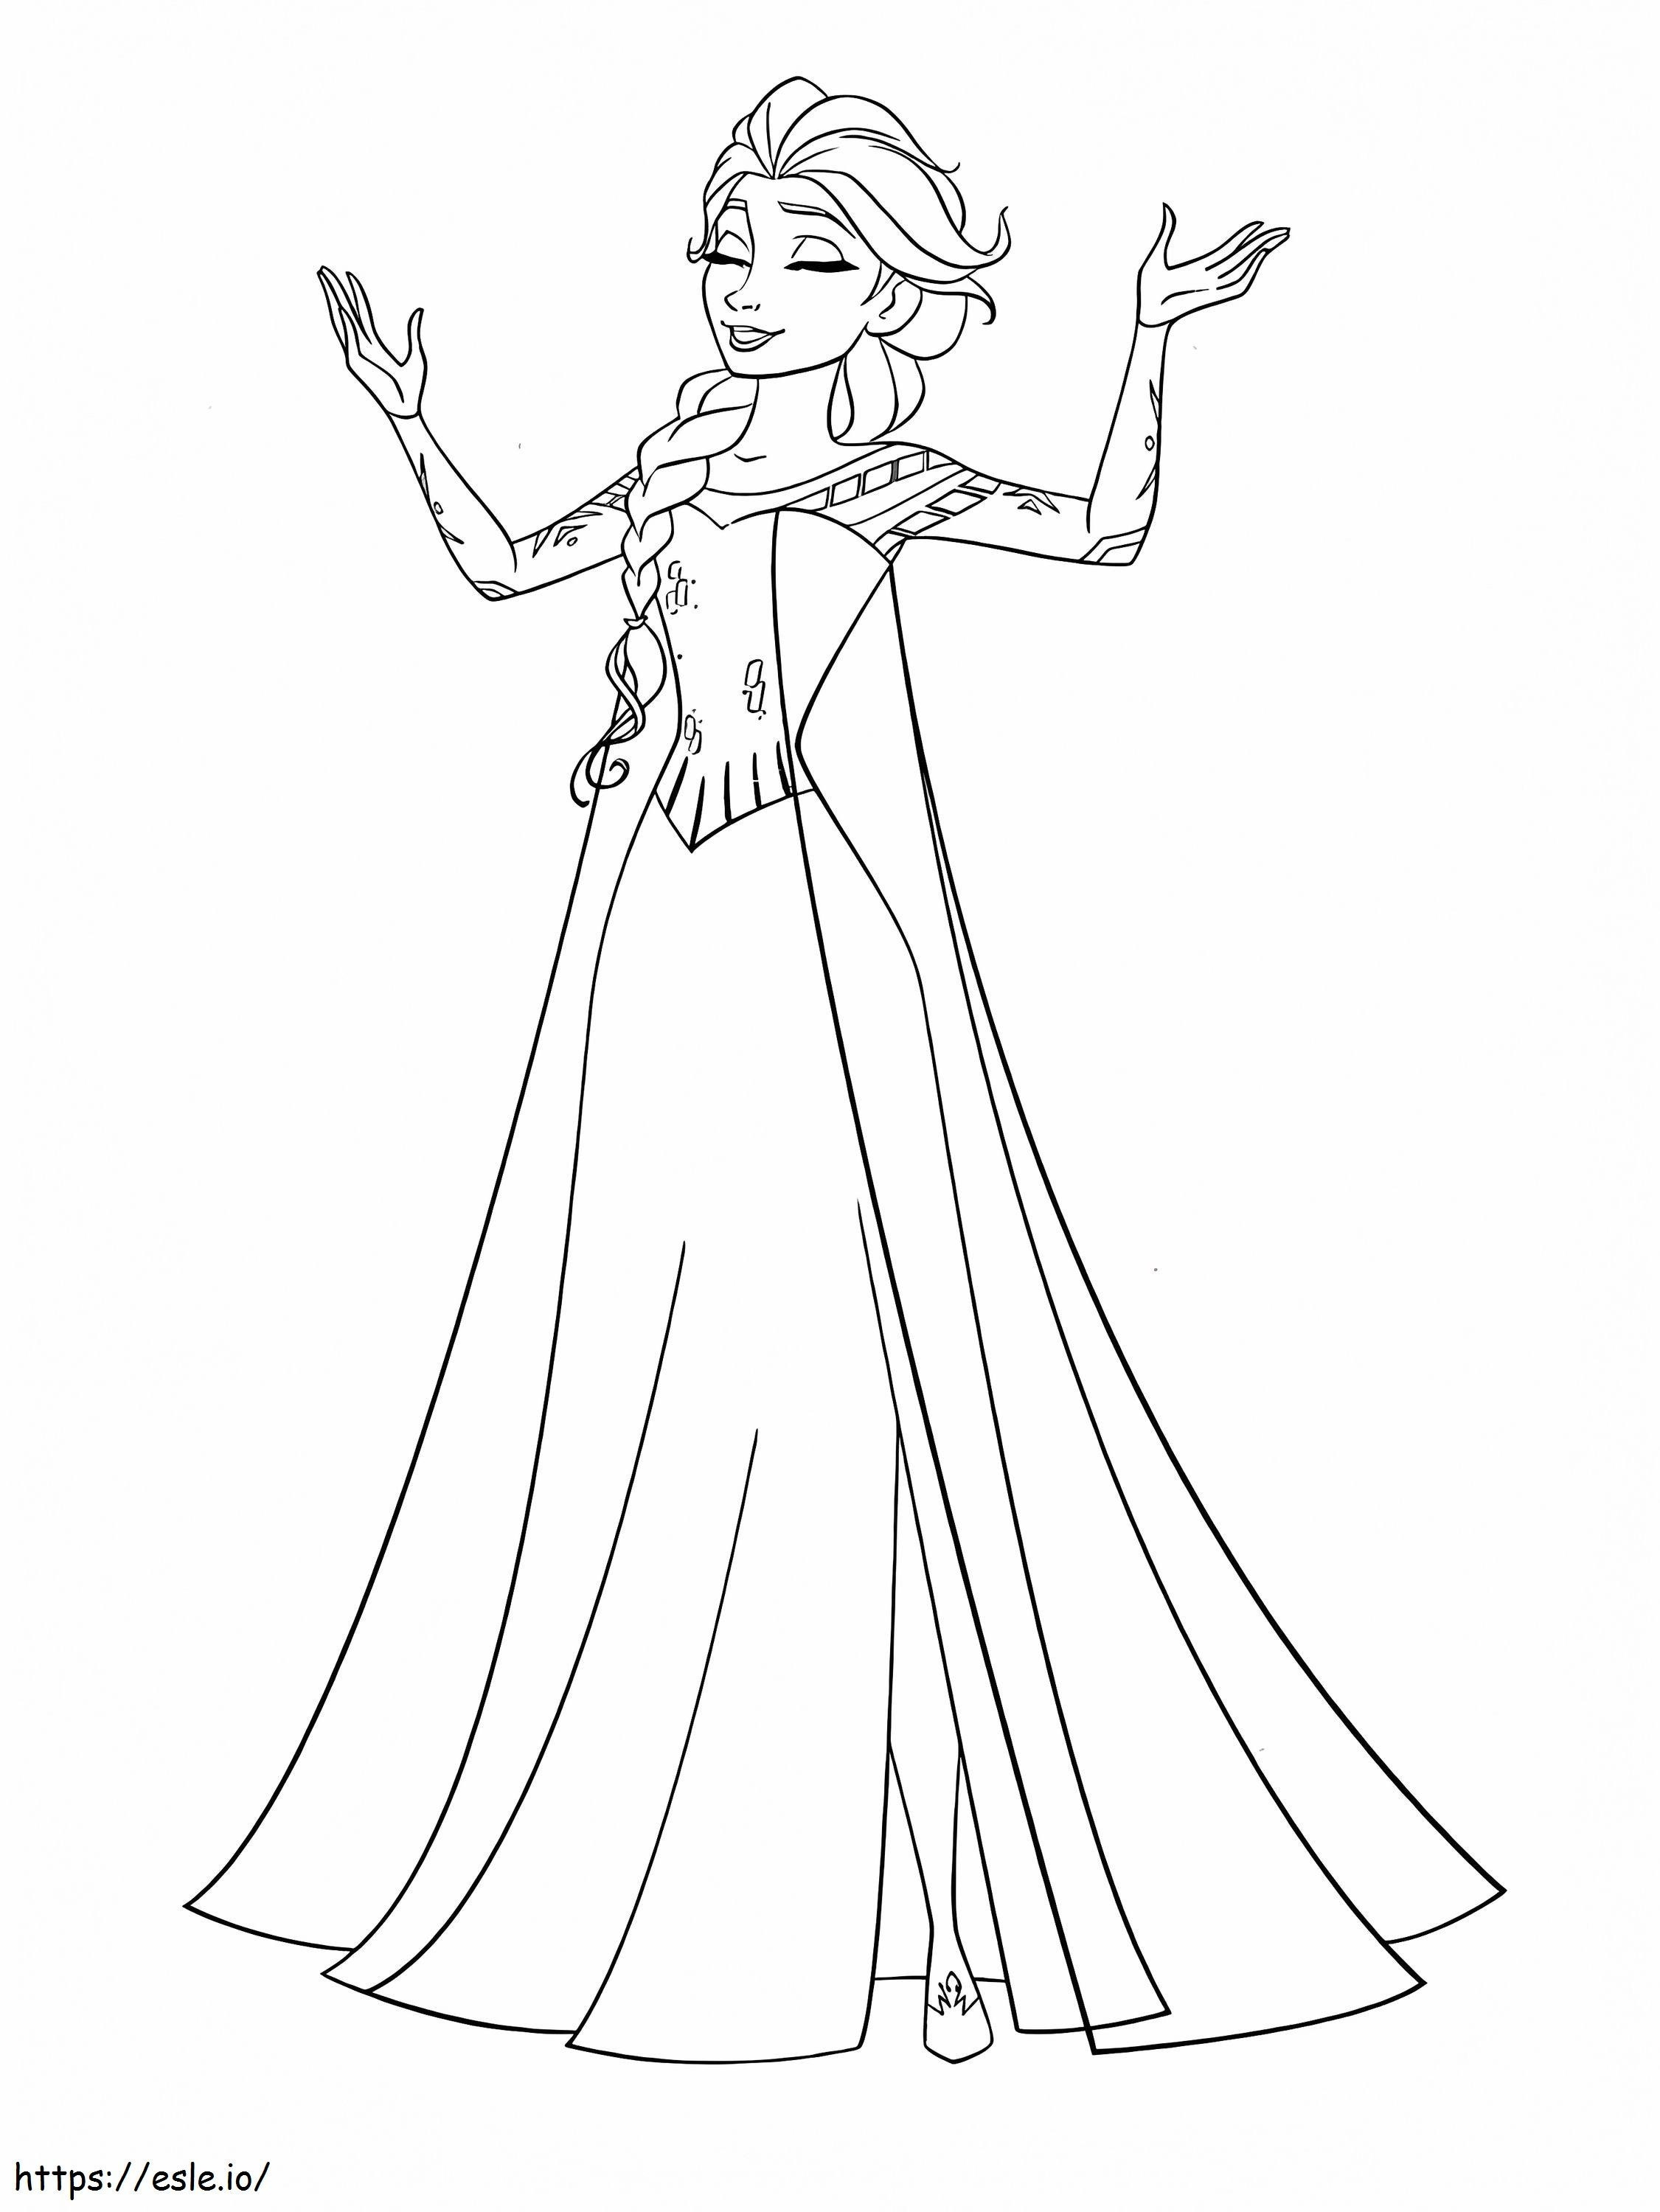 Frozen_001 coloring page